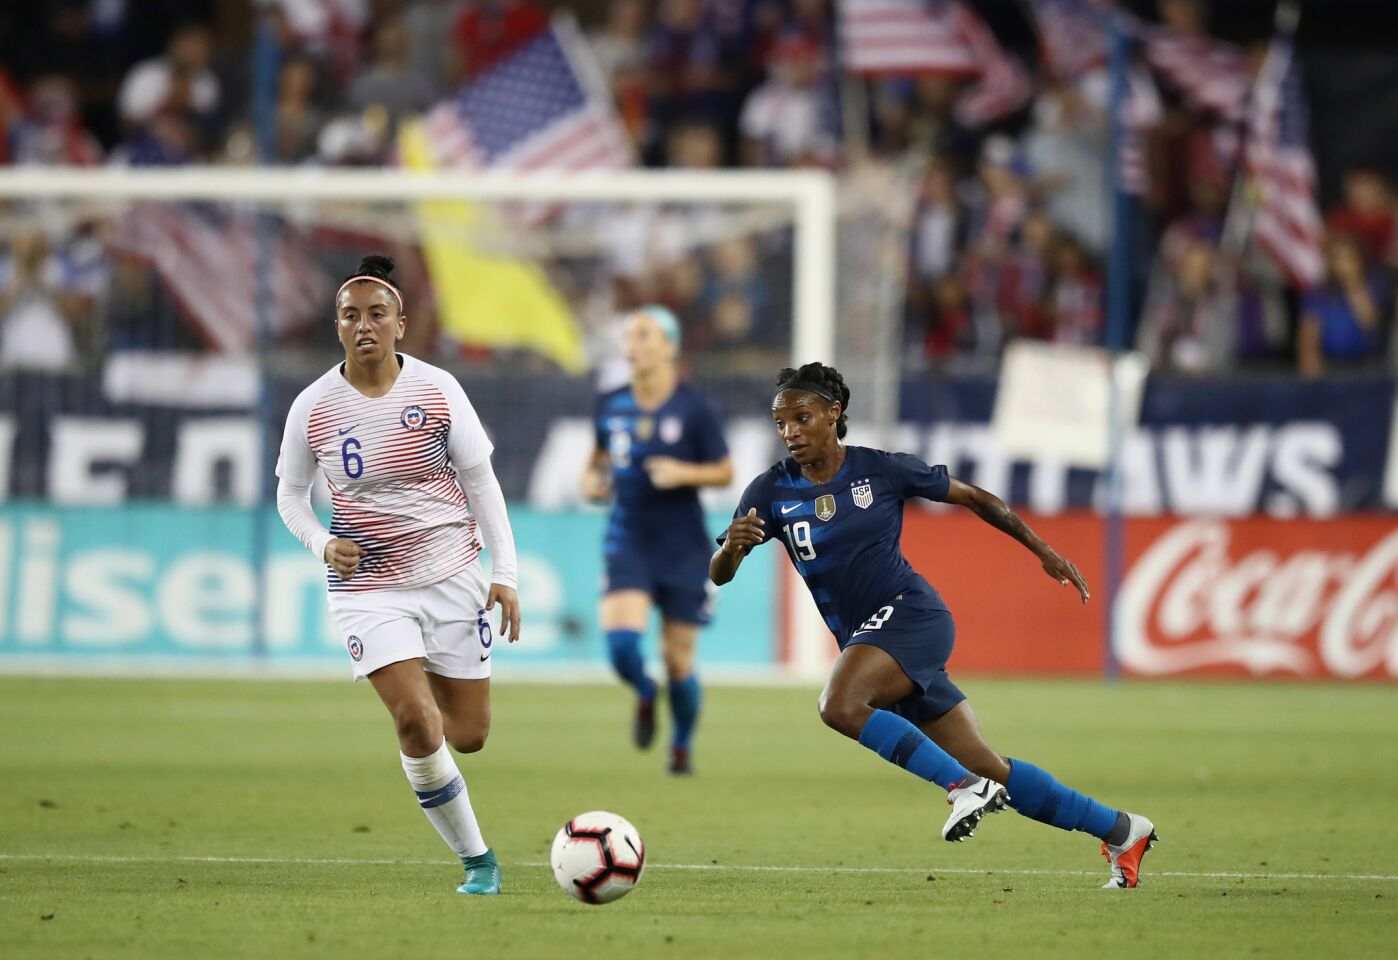 SAN JOSE, CA - SEPTEMBER 04: Crystal Dunn of the United States dribbles past Claudia Soto of Chile during their match at Avaya Stadium on September 4, 2018 in San Jose, California. (Photo by Ezra Shaw/Getty Images) ** OUTS - ELSENT, FPG, CM - OUTS * NM, PH, VA if sourced by CT, LA or MoD **